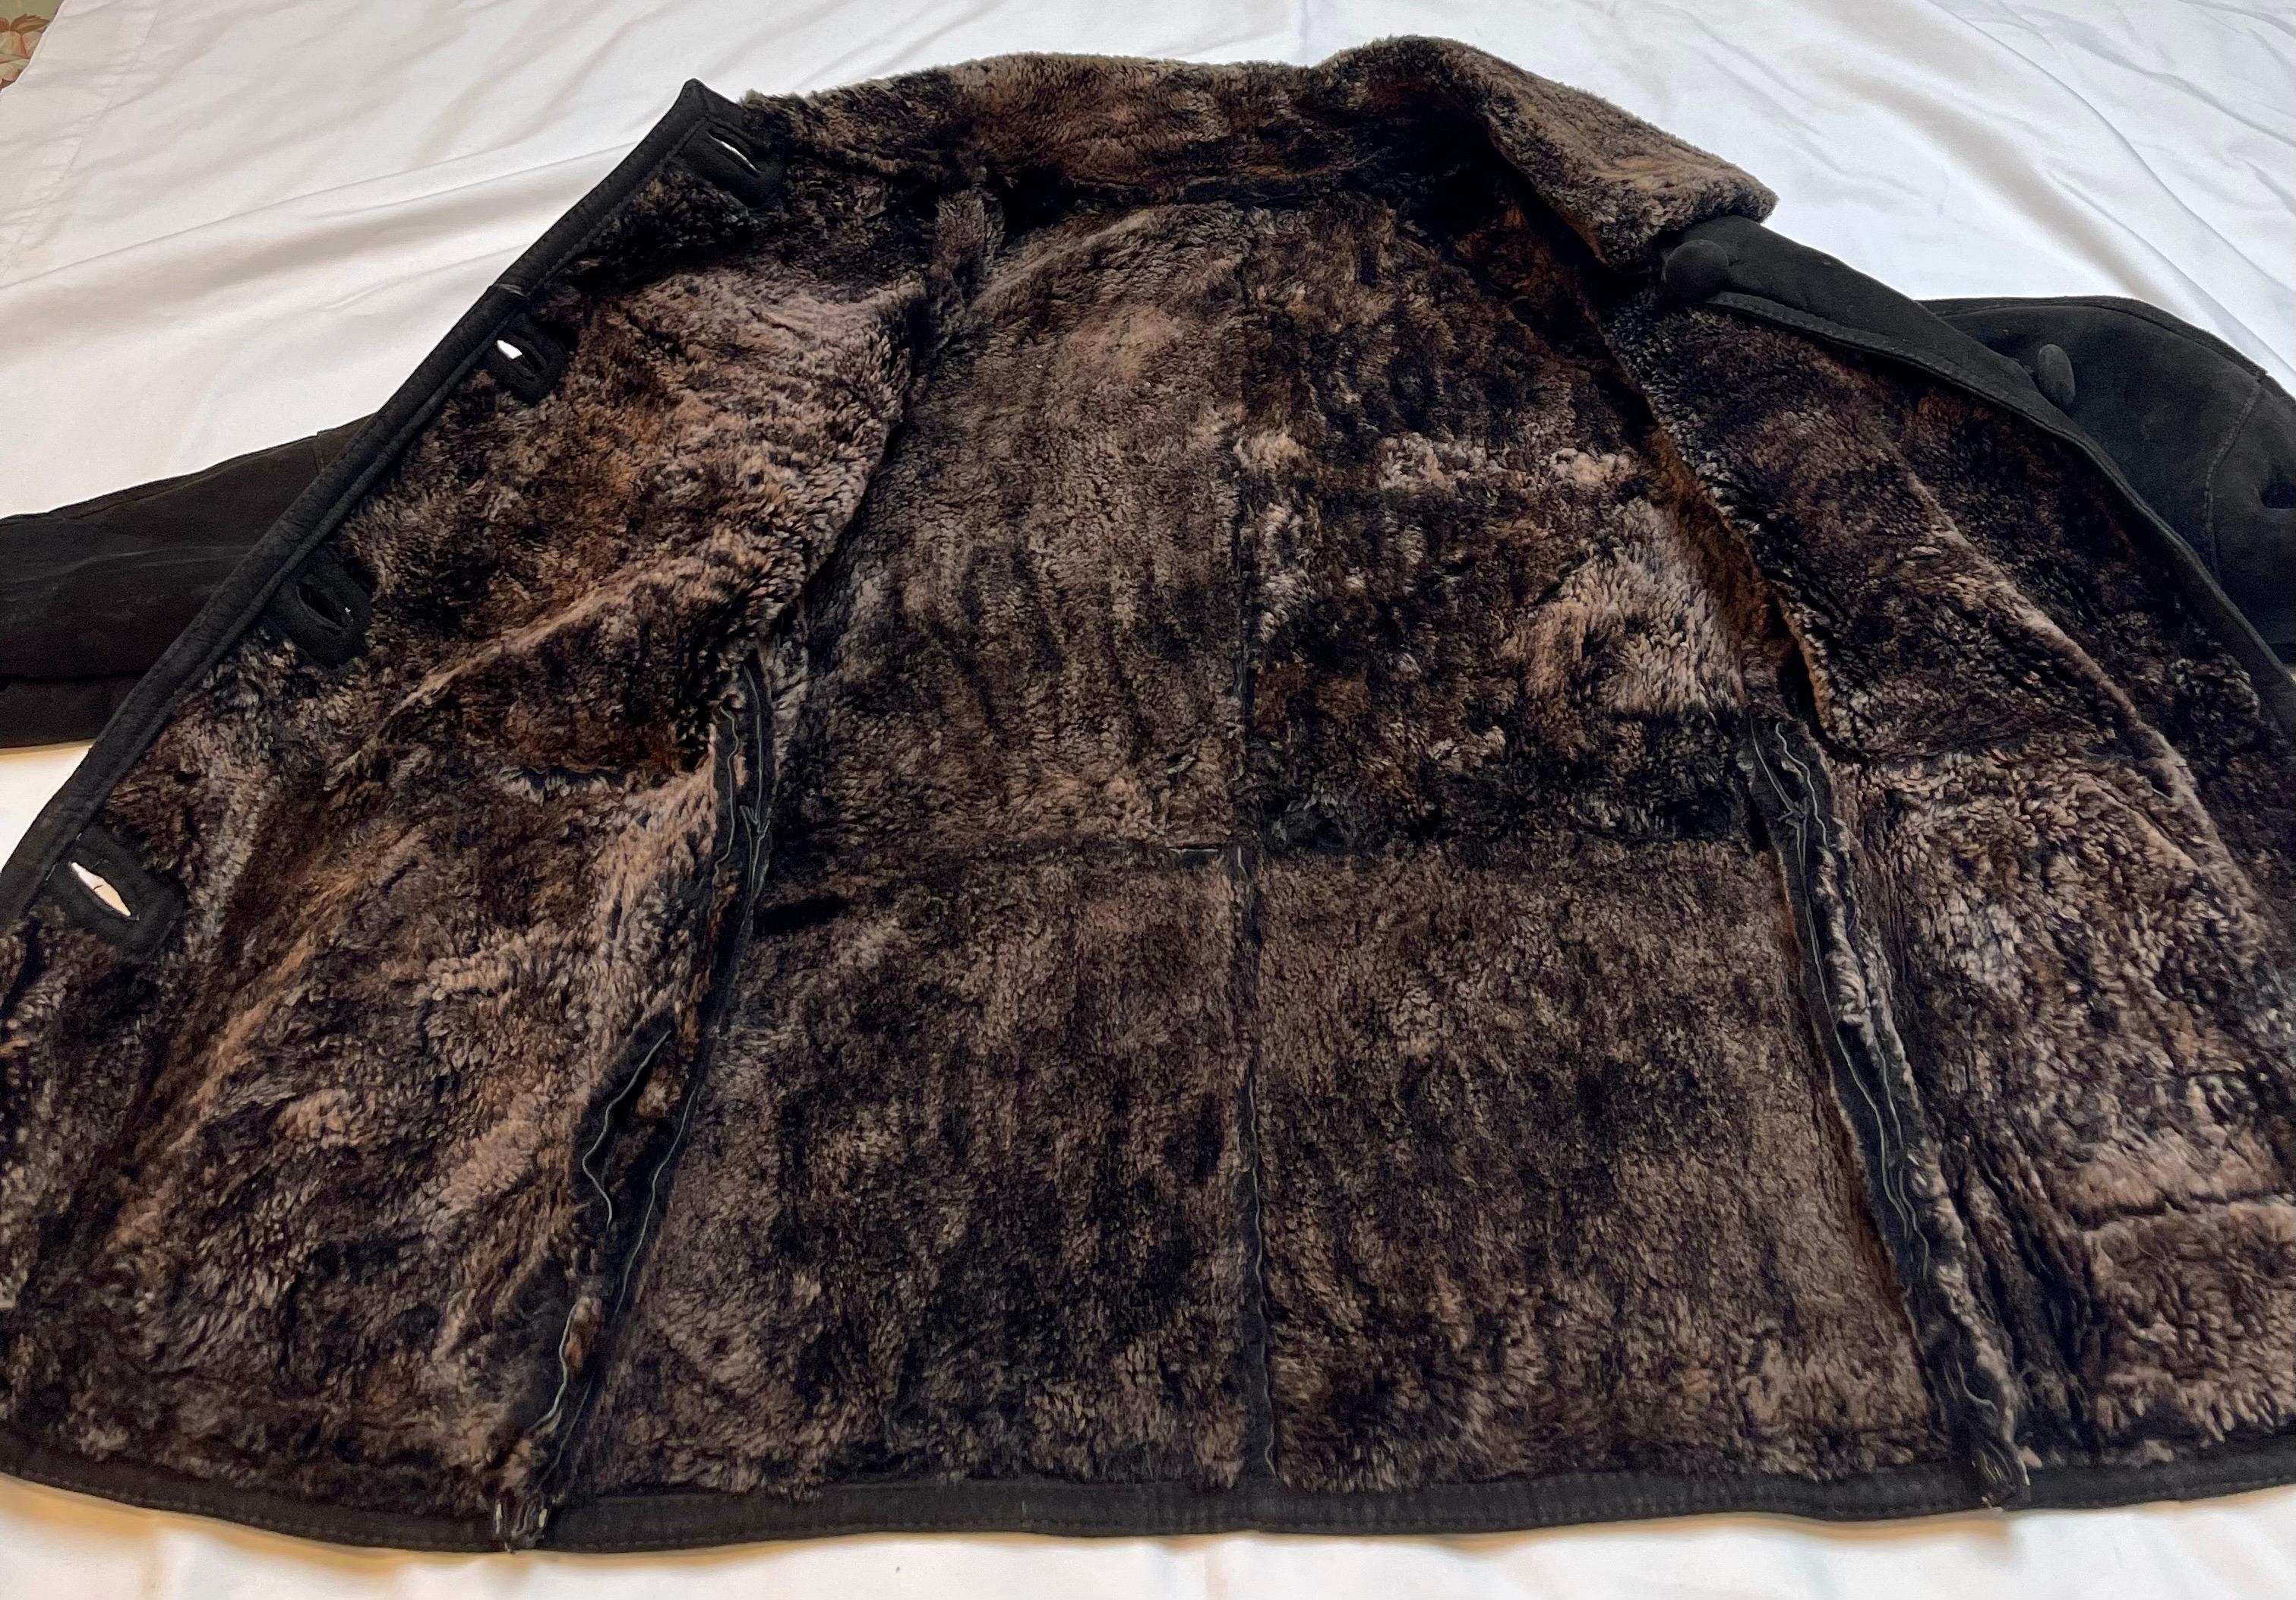   High Country Shearling Sheepskin Coat excellent condition Extra Small Black  1